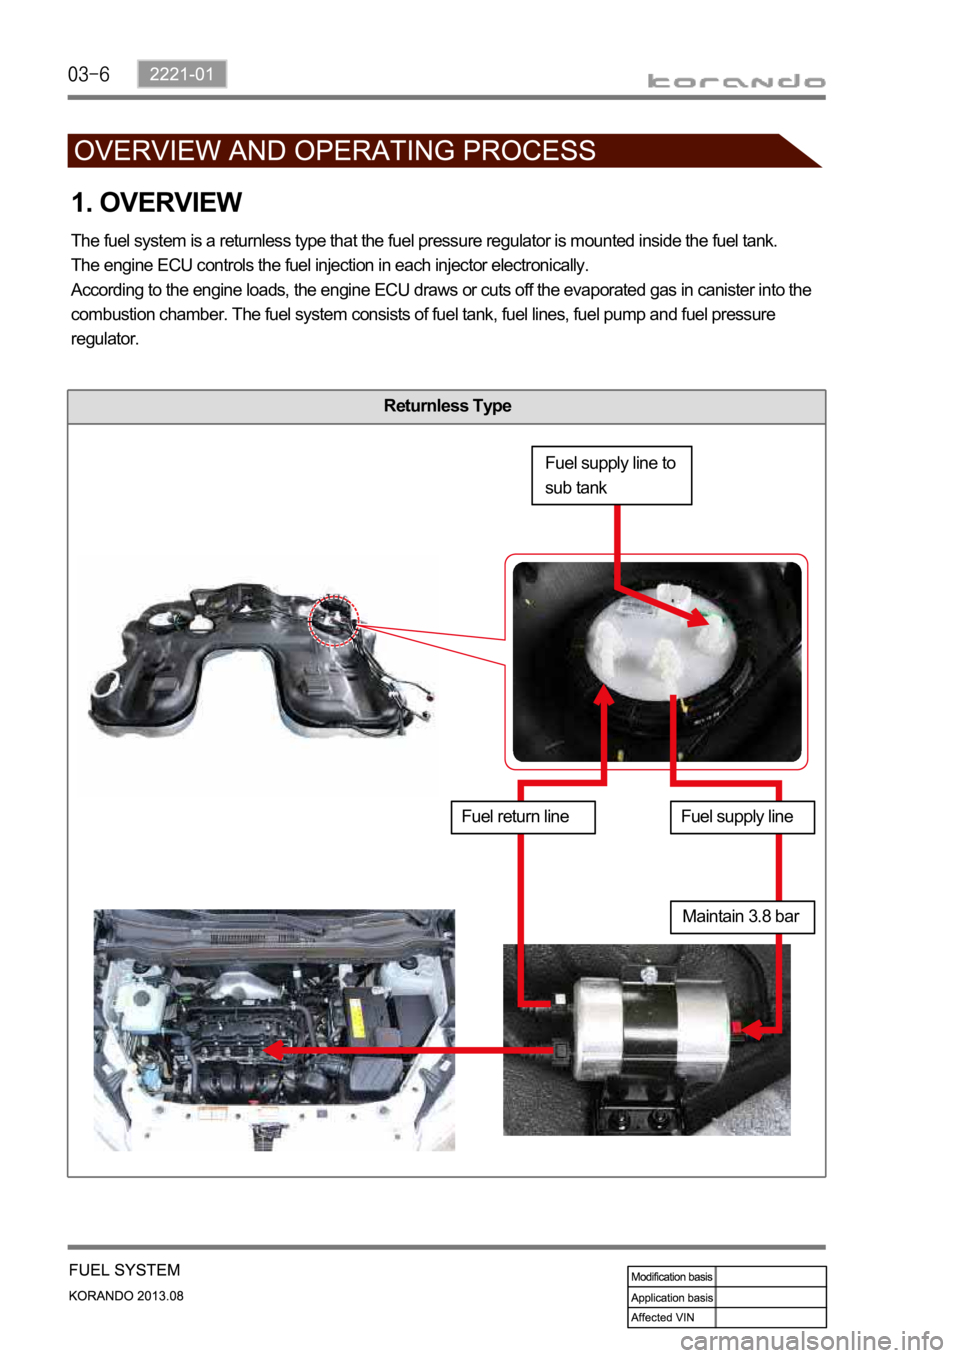 SSANGYONG KORANDO 2013  Service Manual Returnless Type
1. OVERVIEW
The fuel system is a returnless type that the fuel pressure regulator is mounted inside the fuel tank.
The engine ECU controls the fuel injection in each injector electroni